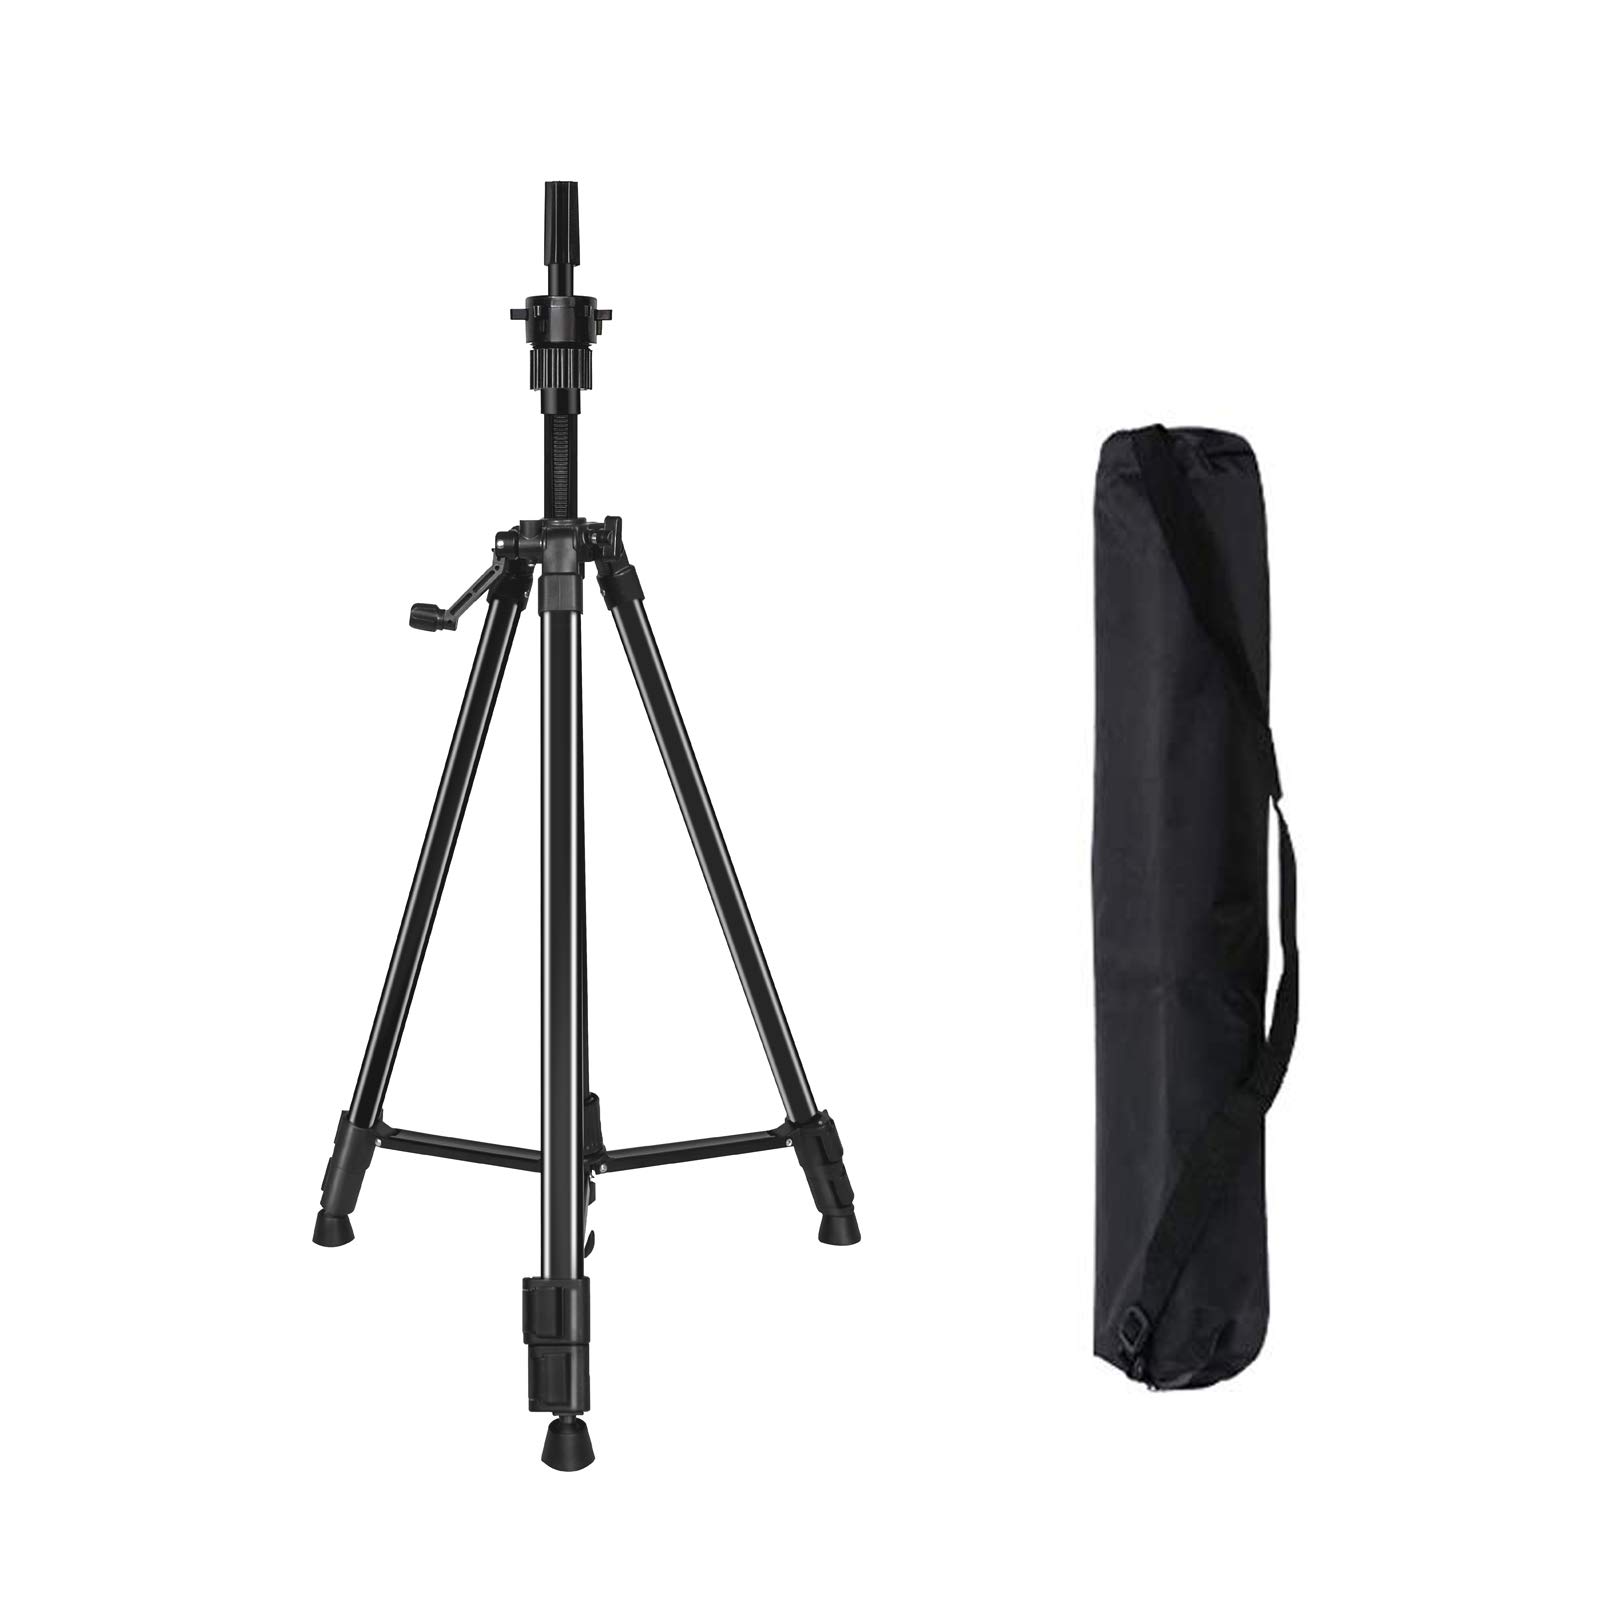 Mannequin Head Stand, Max Length 22 Inch Adjustable Metal Tripod Stand For  Mannequin Head